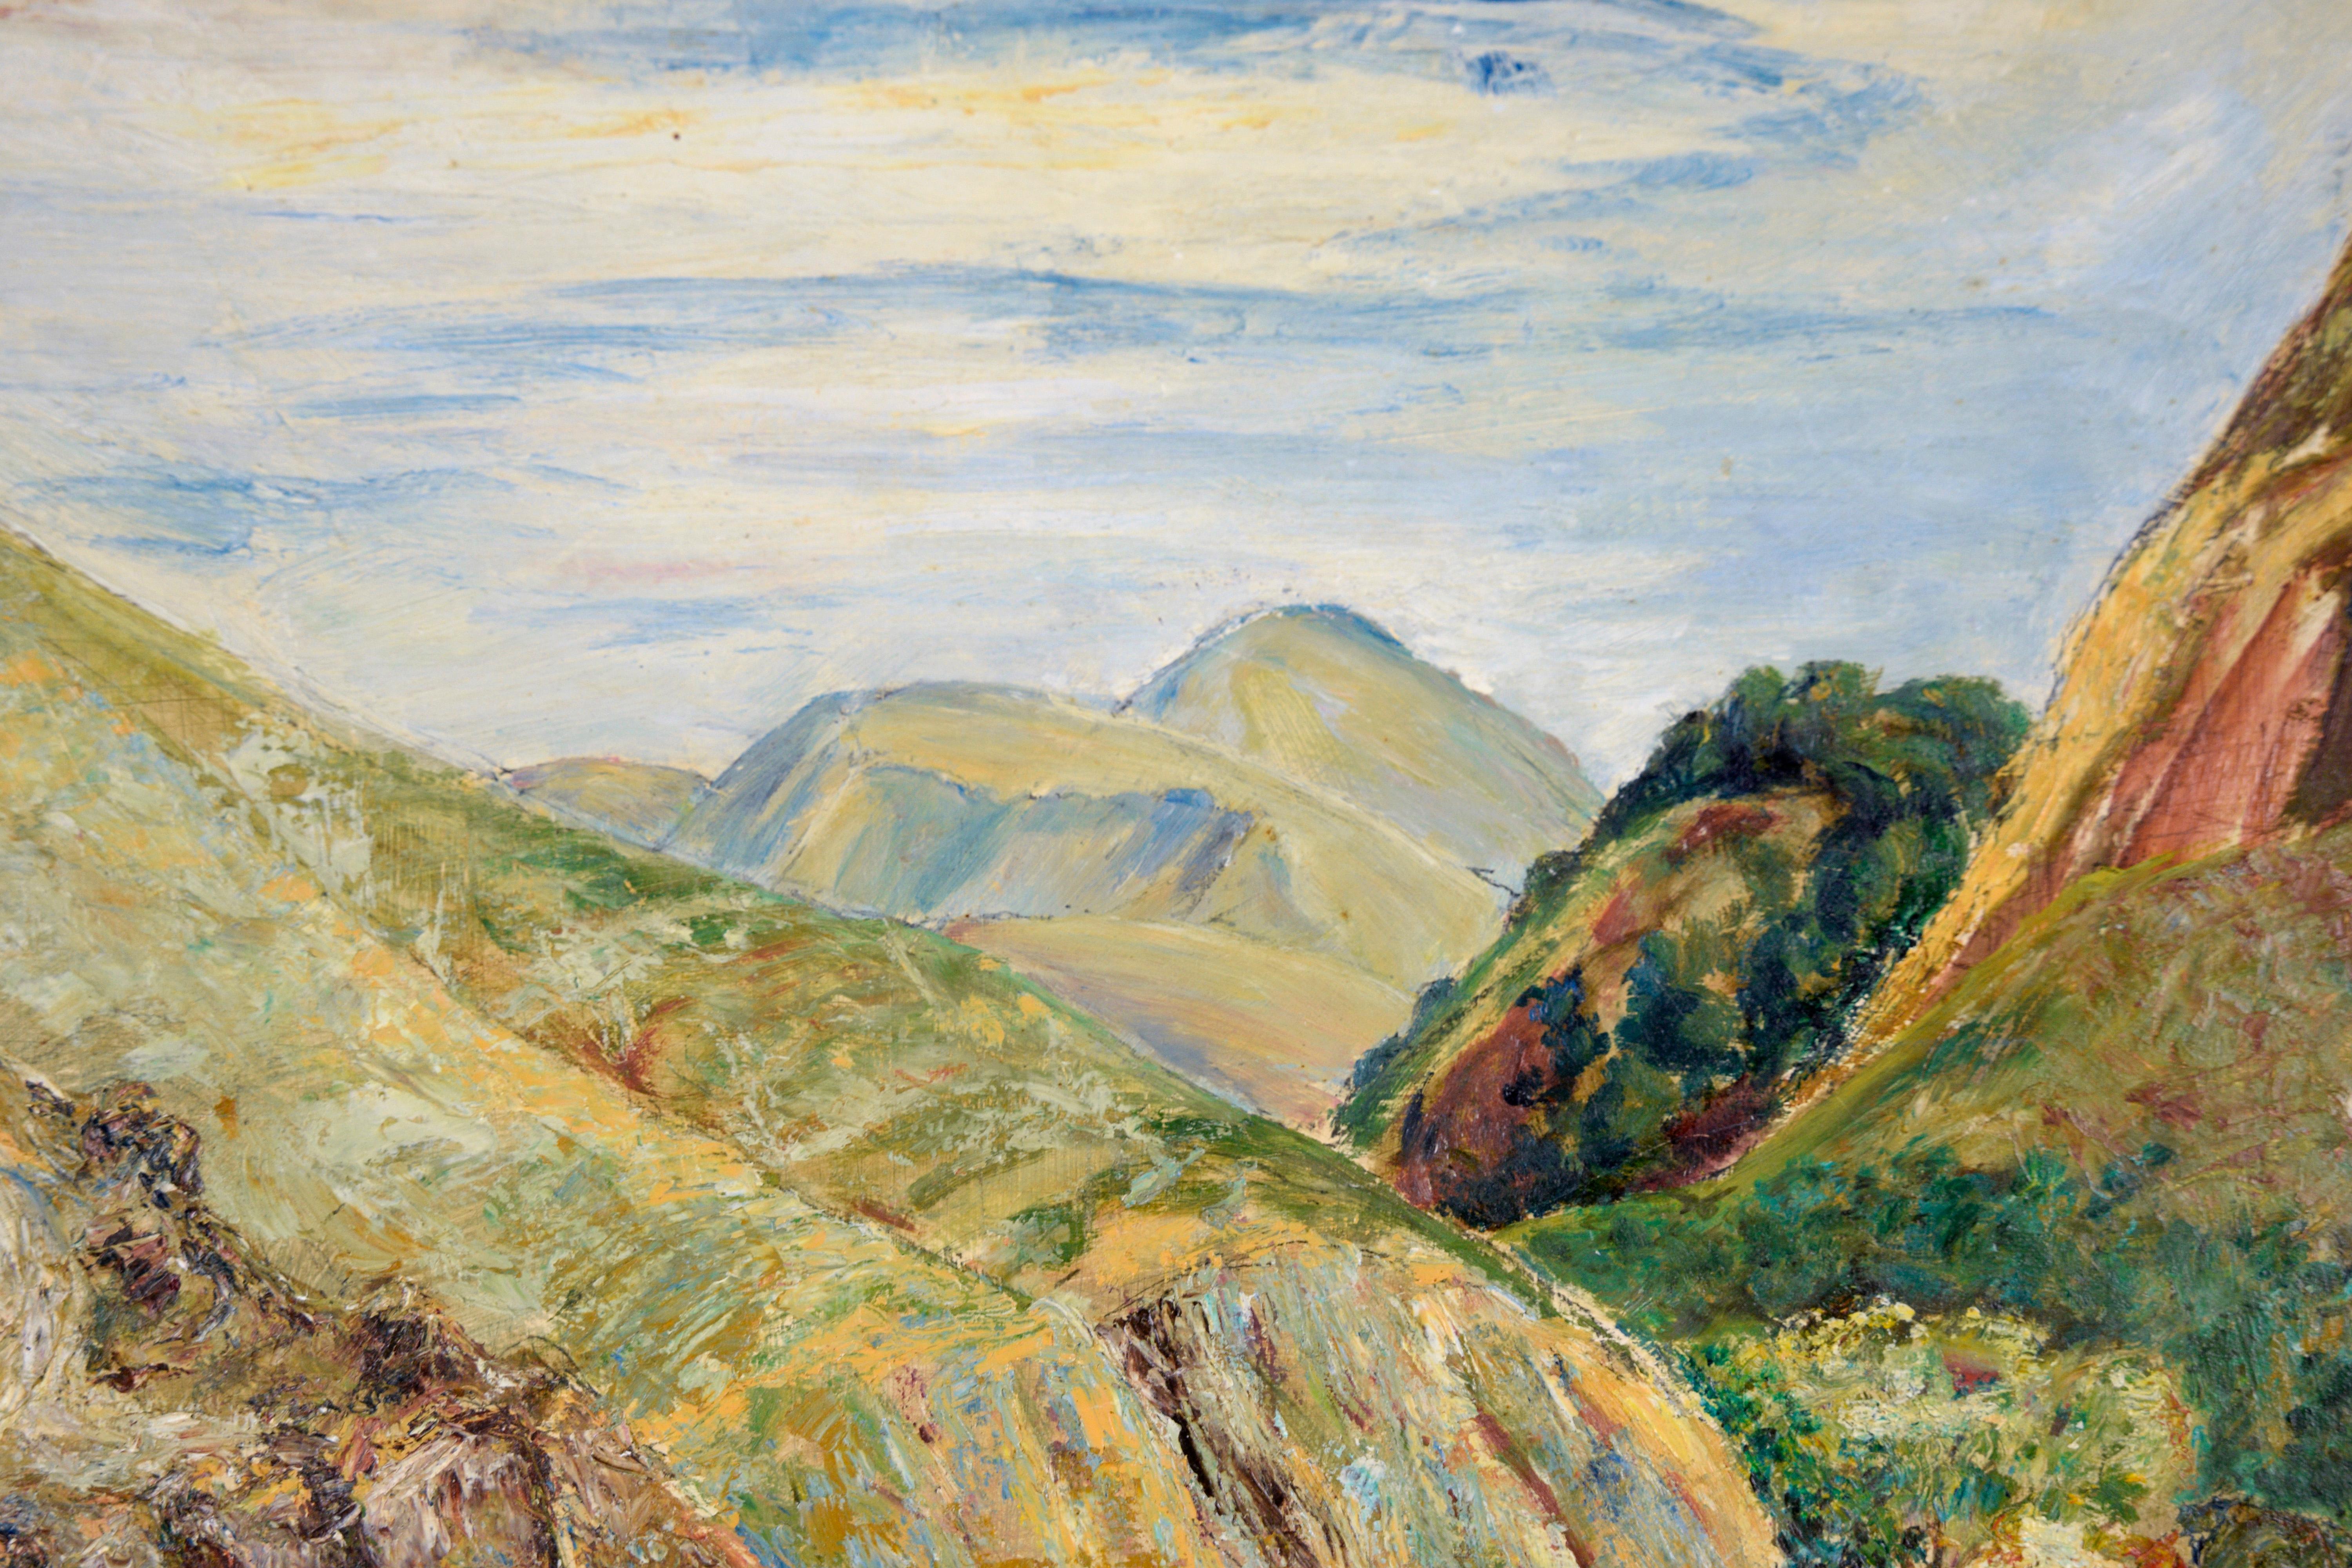 Mountain Road Landscape in Oil on Masonite

Bright and textured mountain landscape by Artemis Wilhelm (American, 20th Century). The viewer stands on a mountain road that winds long the edge of a canyon. The mountains on both sides are highly